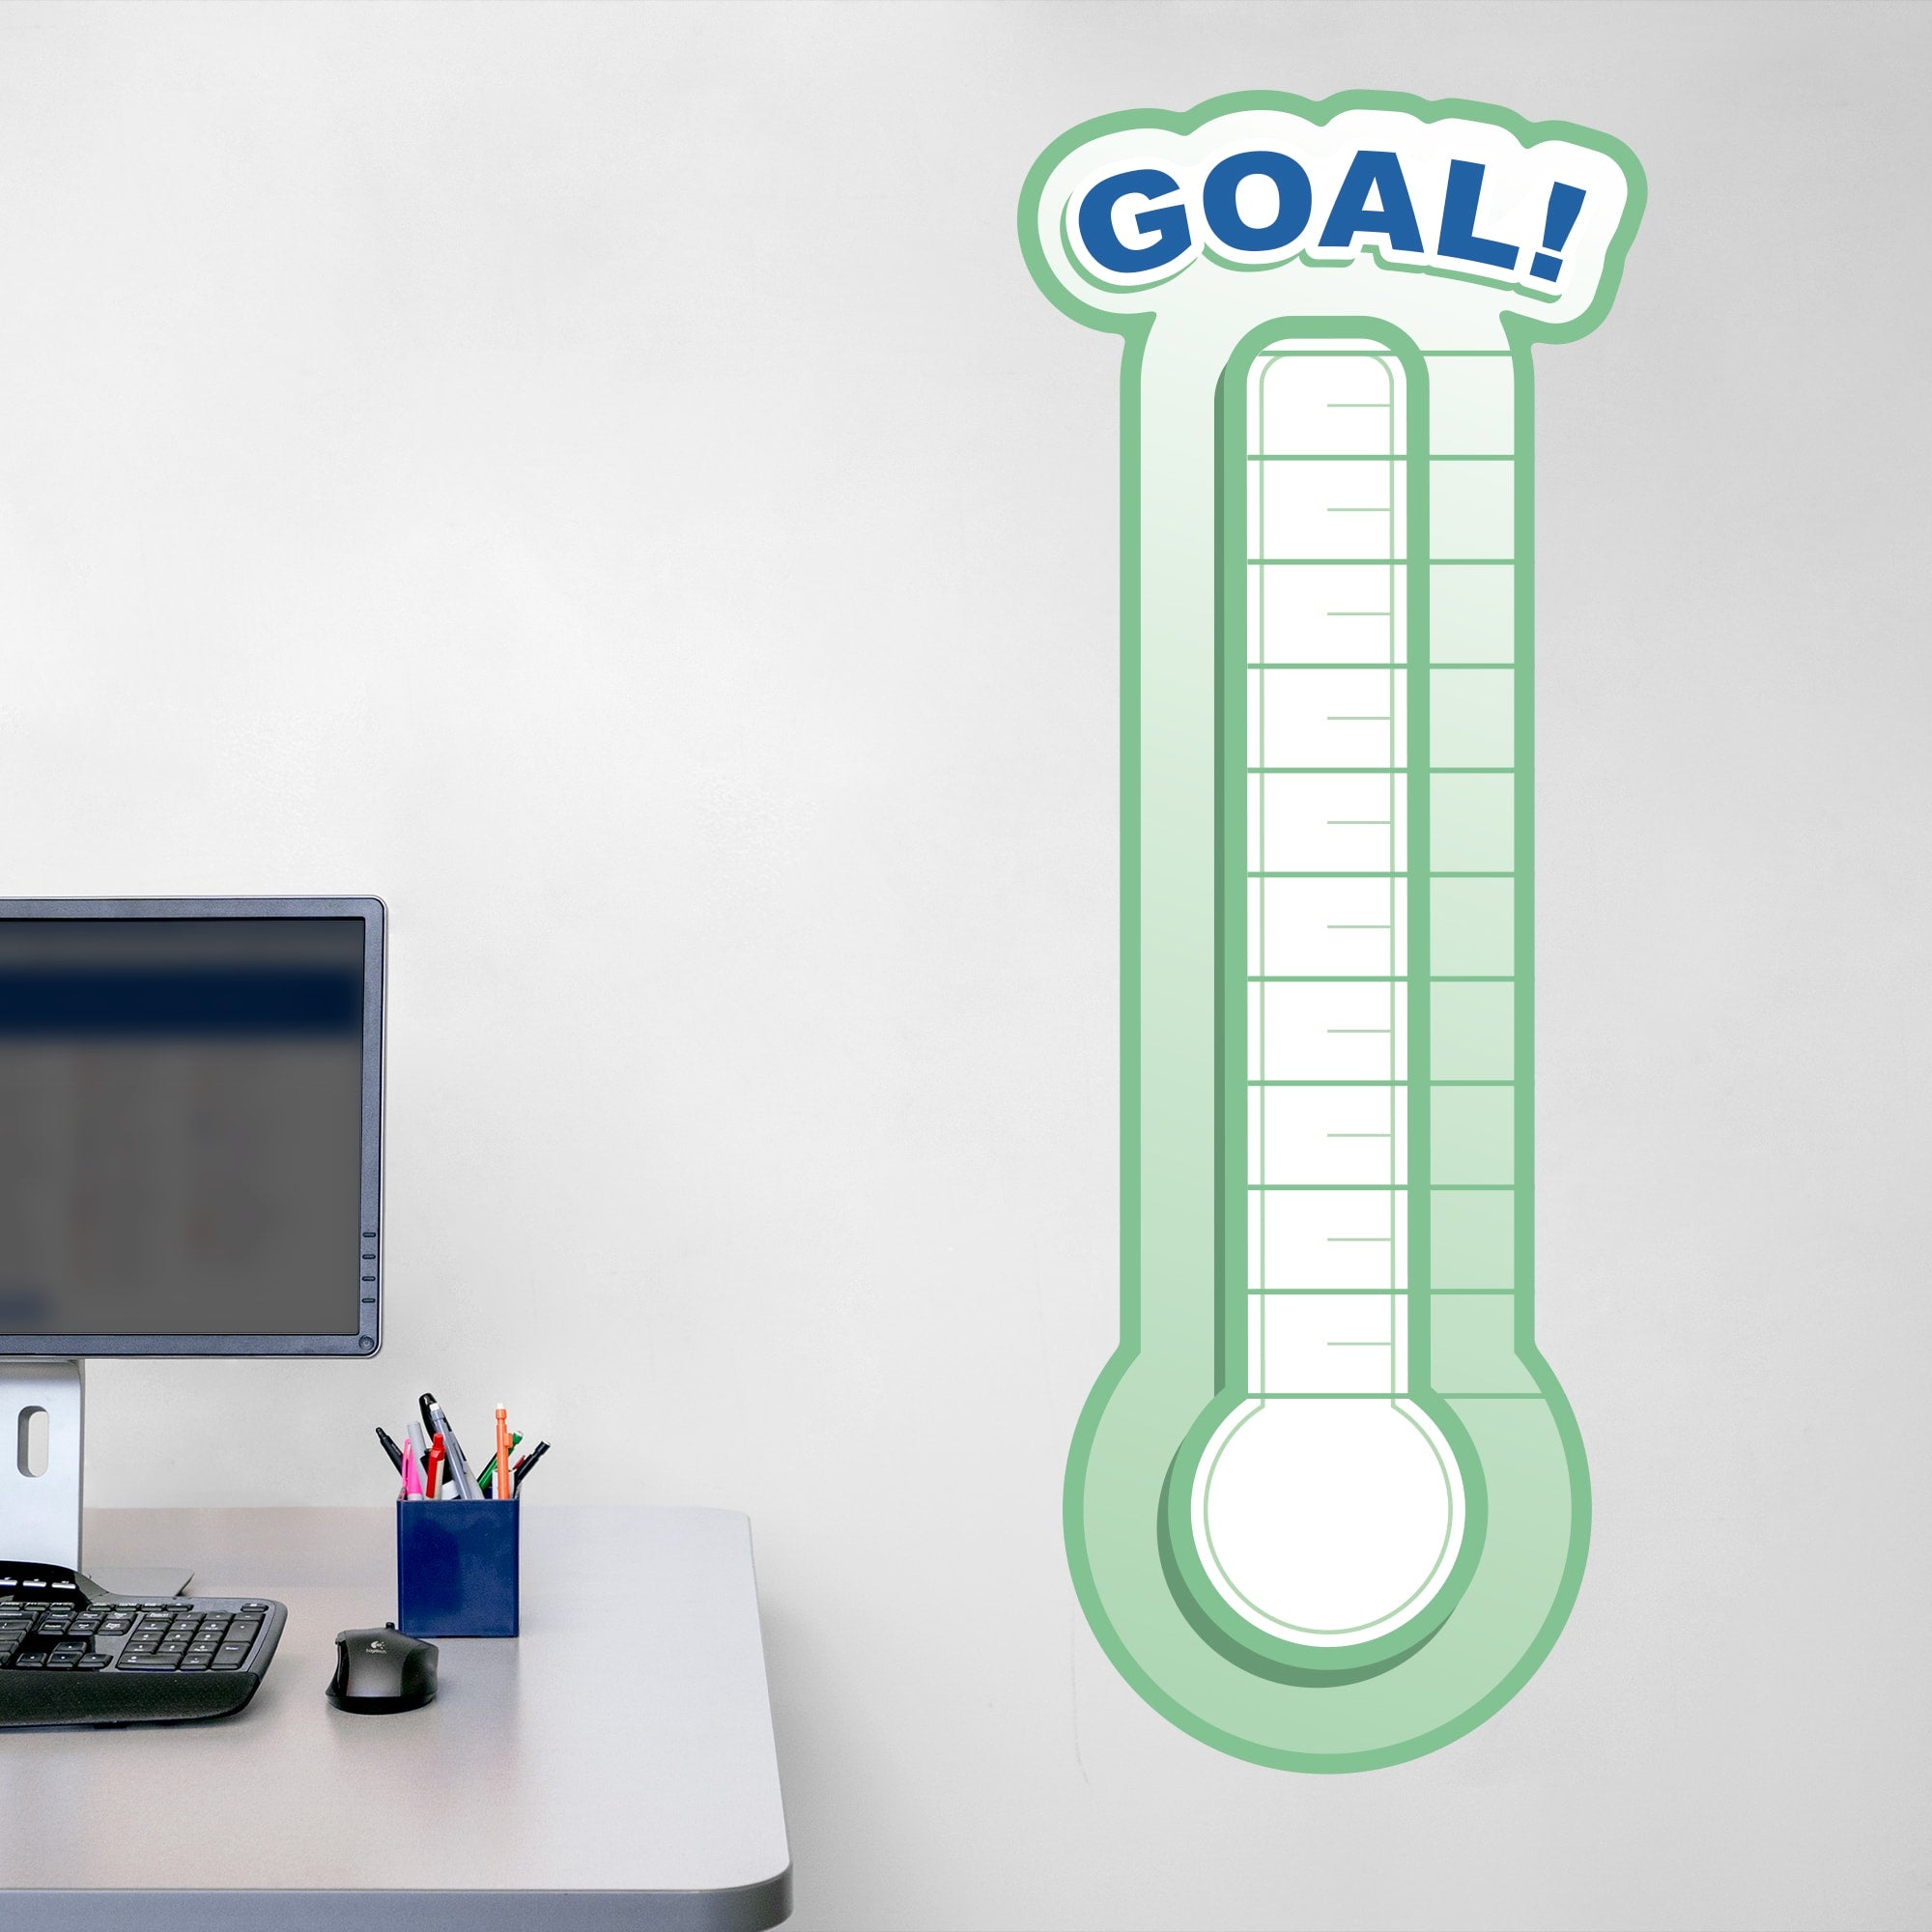 Goal Thermometer - Removable Dry Erase Vinyl Decal in Green (17.5"W x 46.8"H) by Fathead